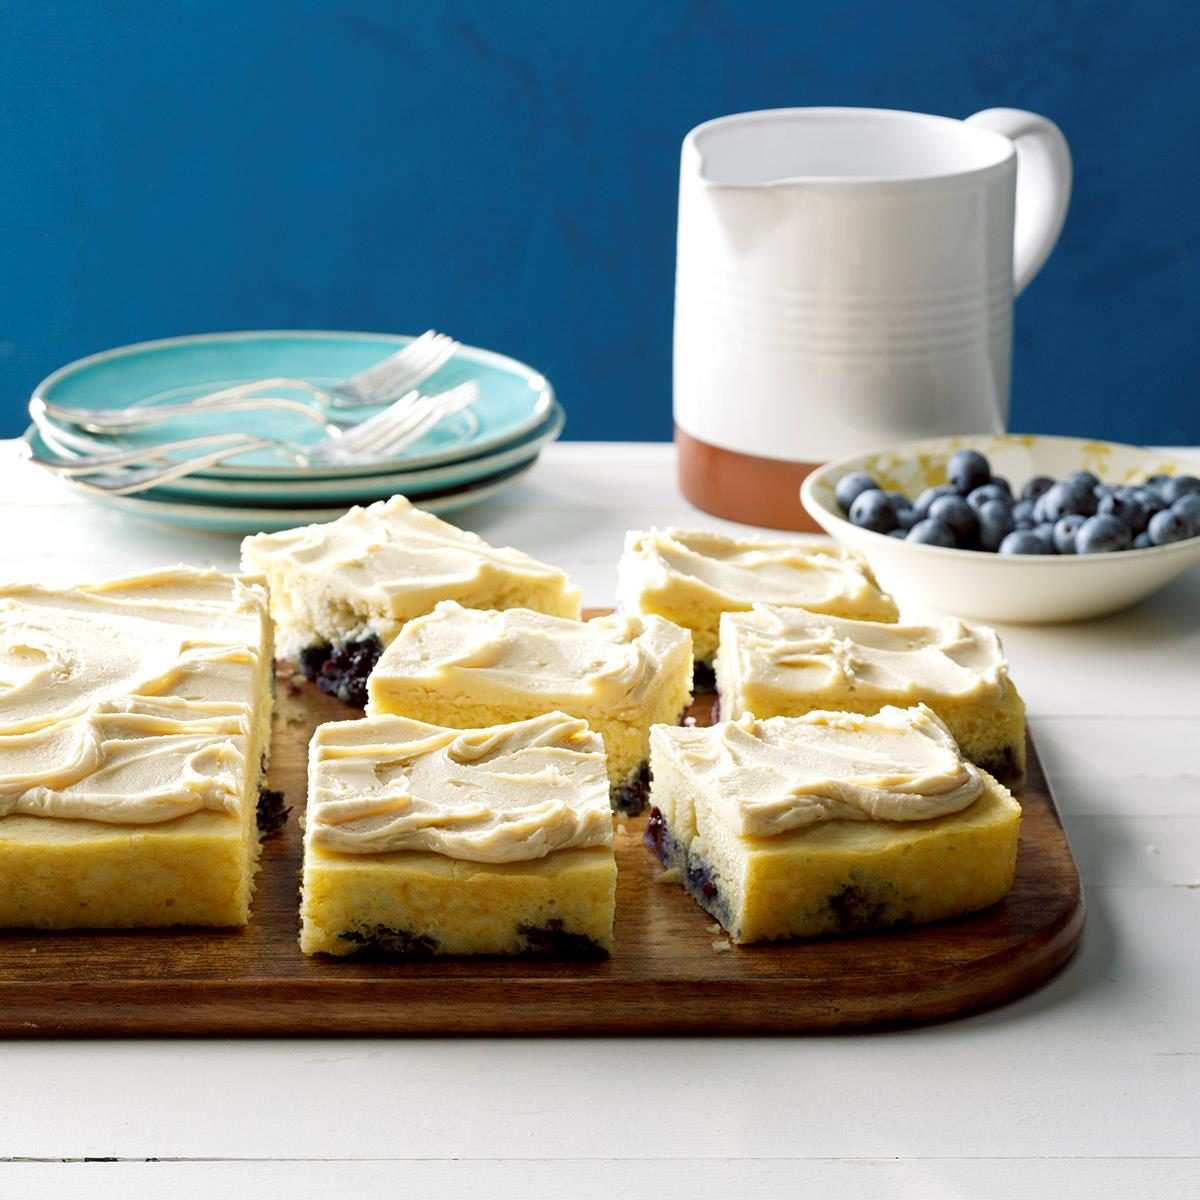 Blueberry Pan-Cake with Maple Frosting